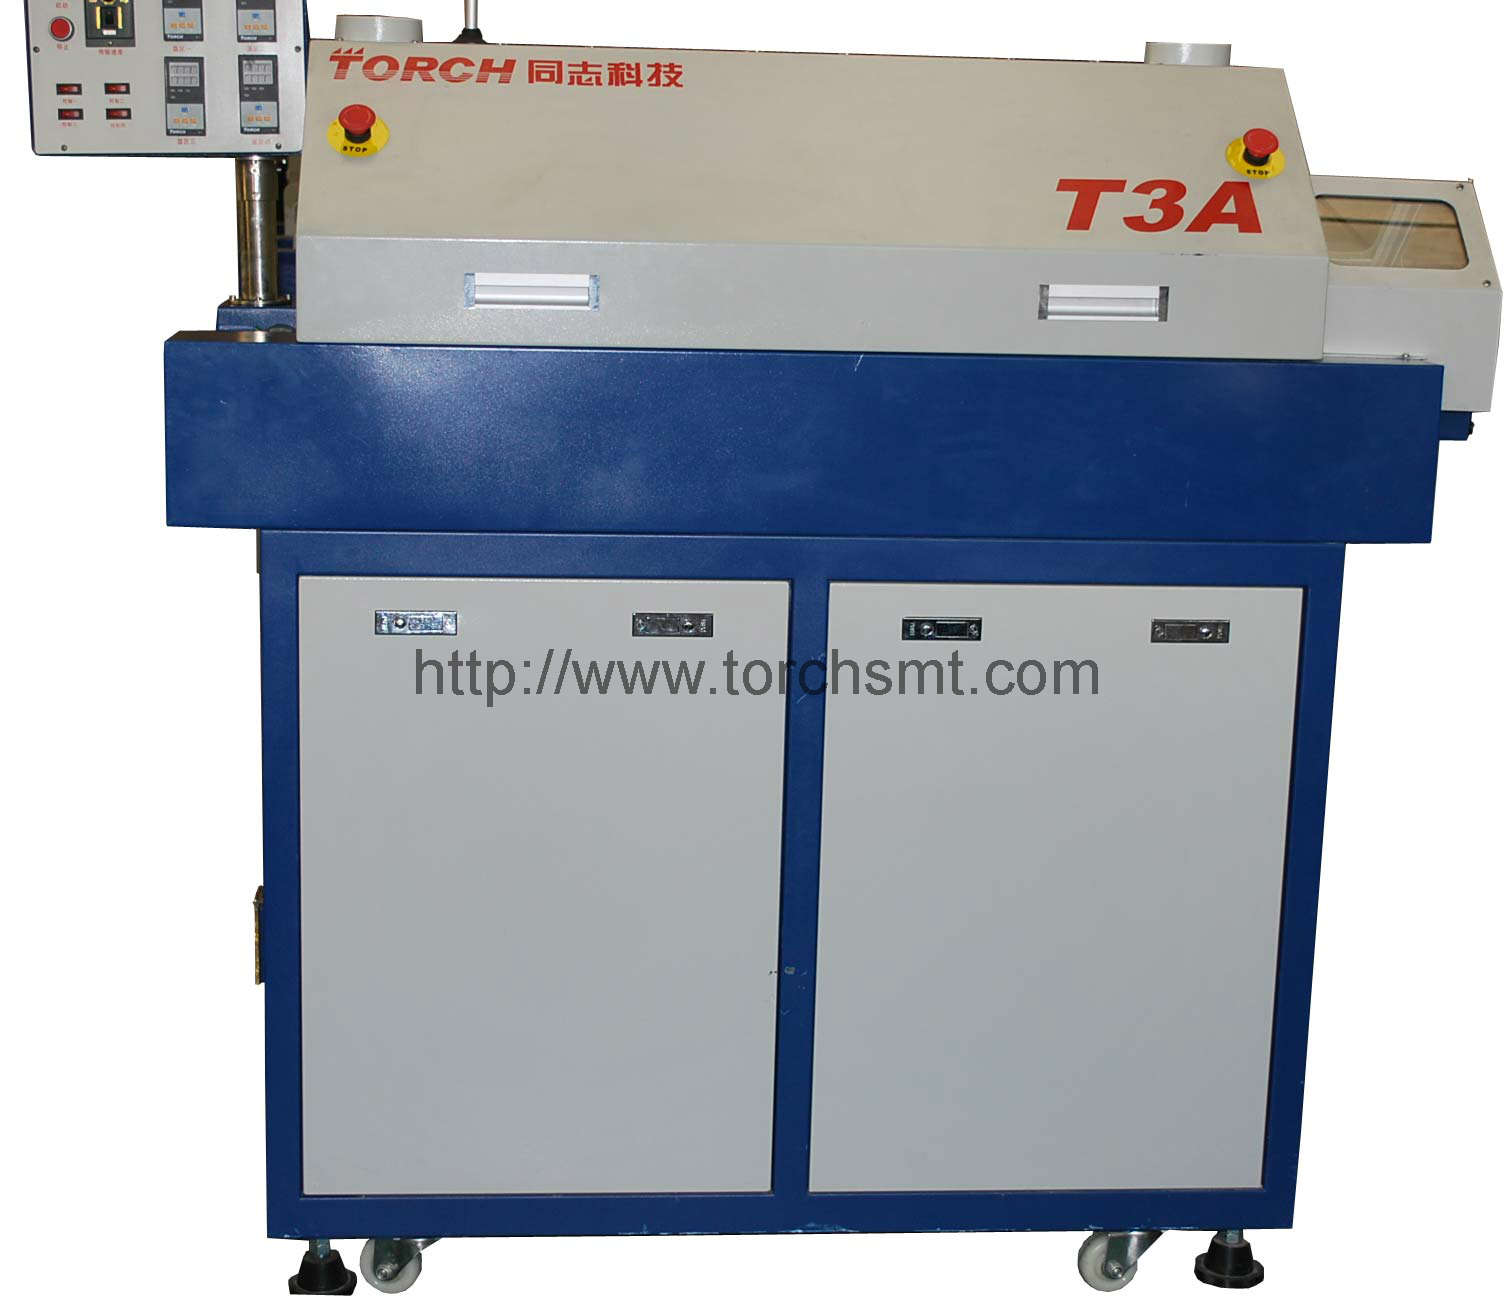 Full hot air Reflow Oven T3A